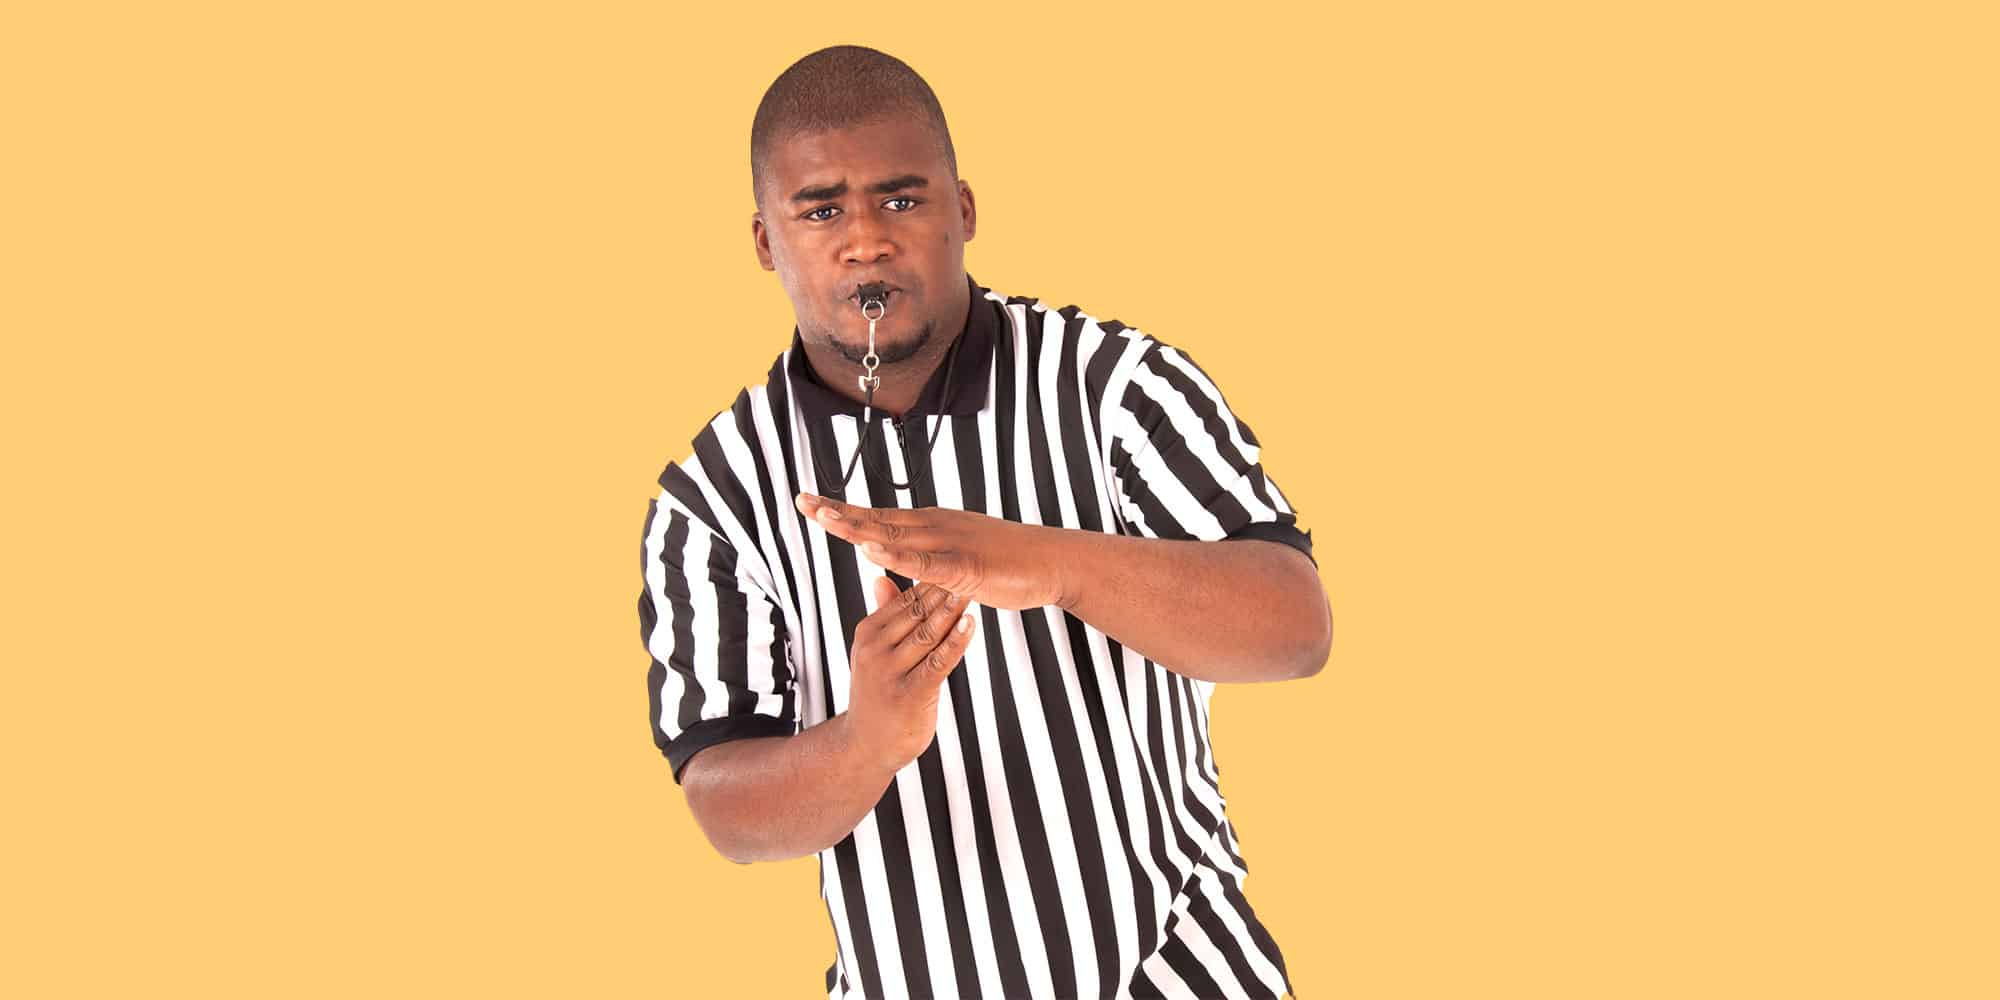 referee making technical foul hand signal